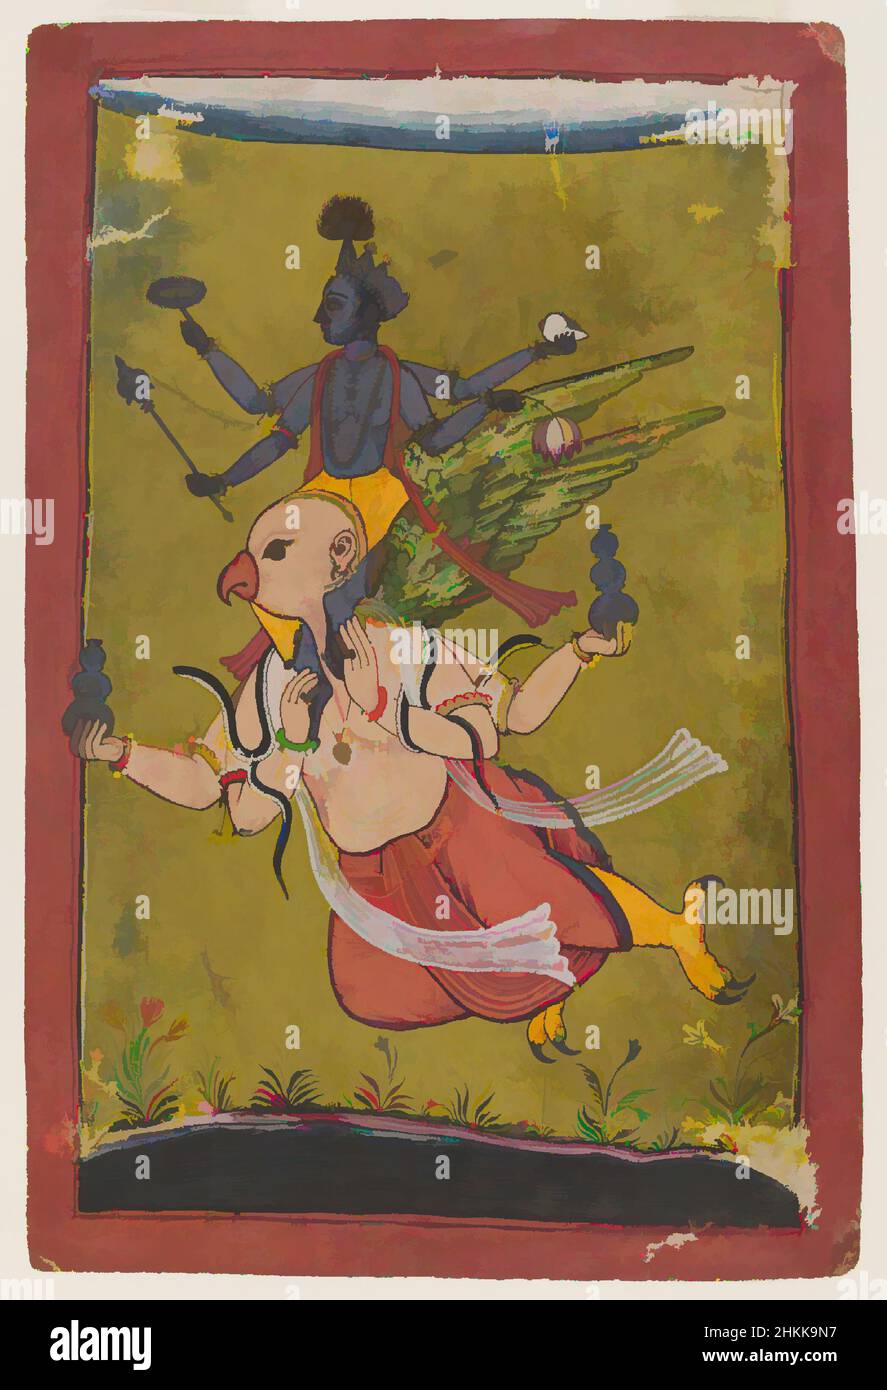 Art inspired by Vishnu on Garuda, Indian, Opaque watercolor, silver, and gold on paper, Punjab Hills, India, ca. 1725 or earlier, sheet: 8 11/16 x 5 3/4 in., 22.1 x 14.6 cm, Basohli, bhakti, Chakra, Conch, Discus, eagle, flying, Garuda, god, gold, India, Indian Art, Jewelry, Lotus, Mace, Classic works modernized by Artotop with a splash of modernity. Shapes, color and value, eye-catching visual impact on art. Emotions through freedom of artworks in a contemporary way. A timeless message pursuing a wildly creative new direction. Artists turning to the digital medium and creating the Artotop NFT Stock Photo